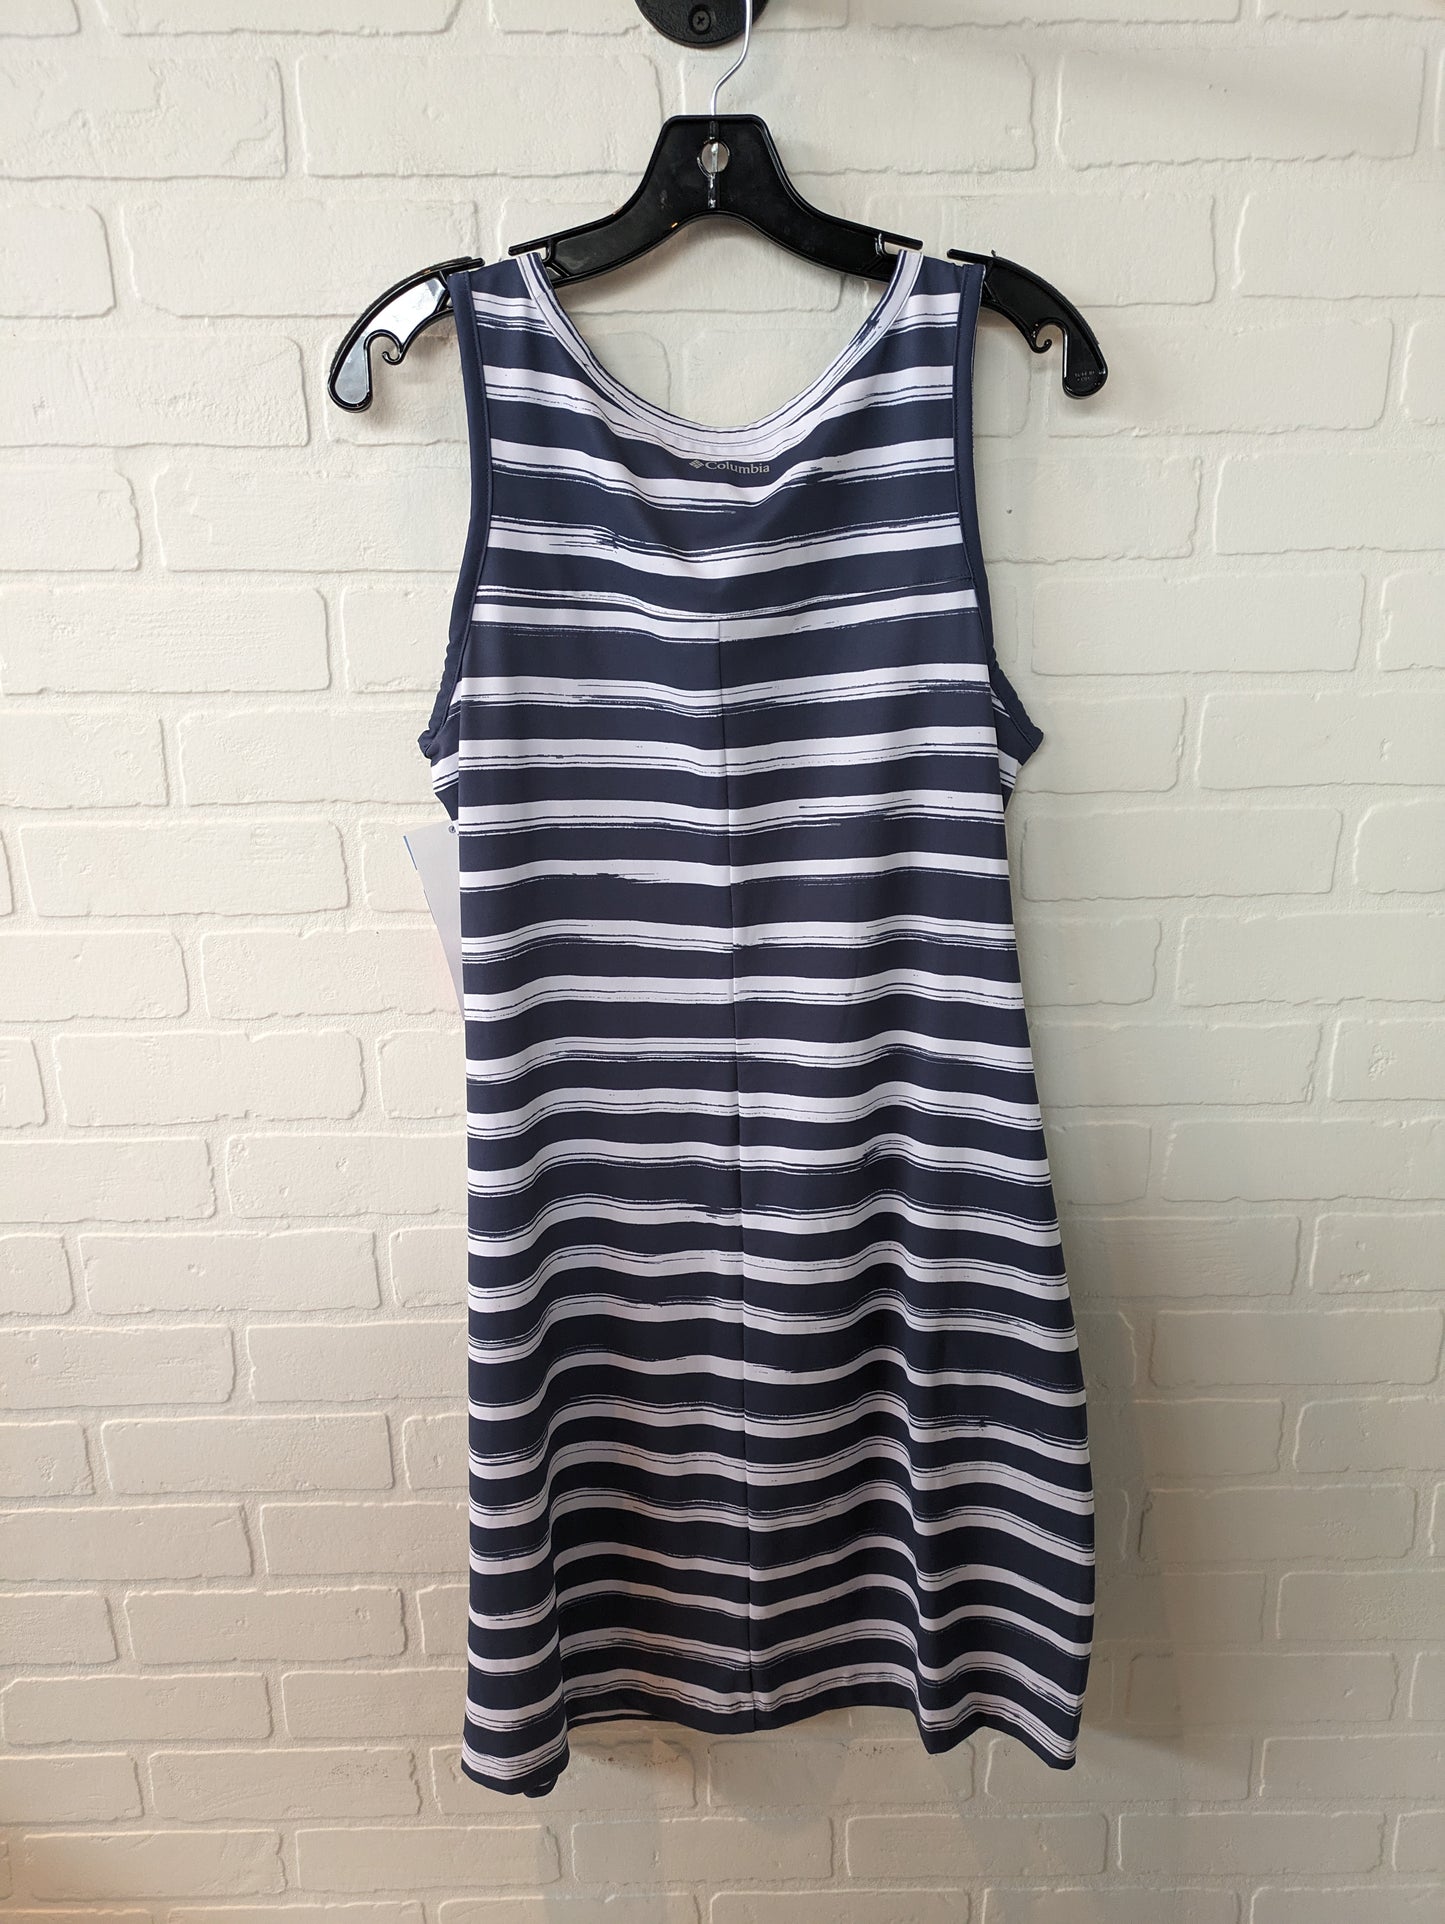 Athletic Dress By Columbia  Size: M